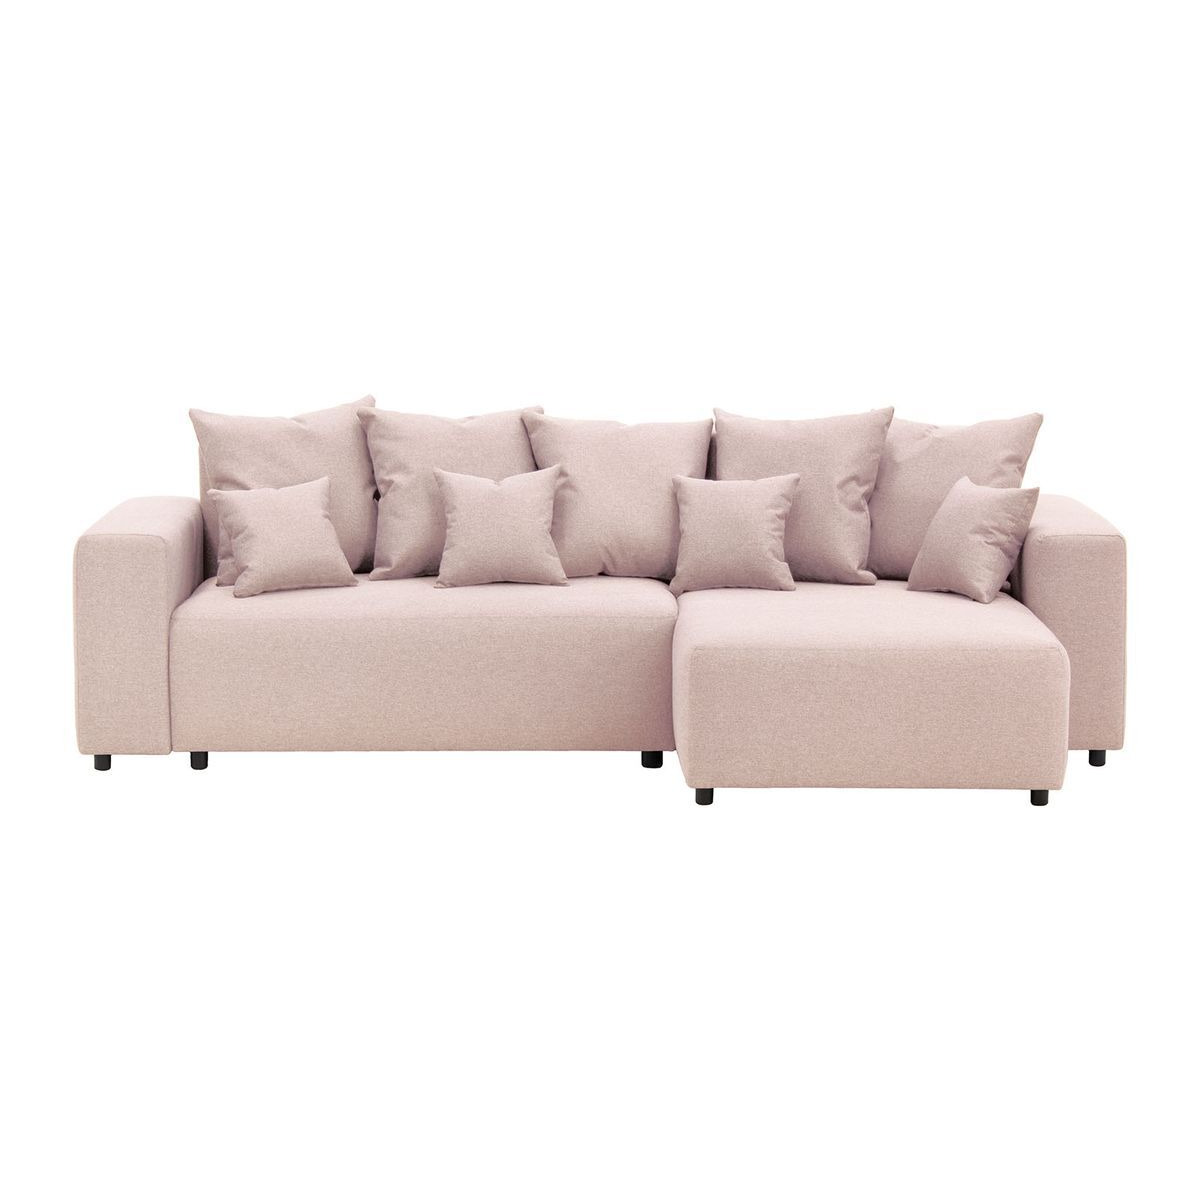 Homely Right Hand Corner Sofa Bed, pastel pink - image 1